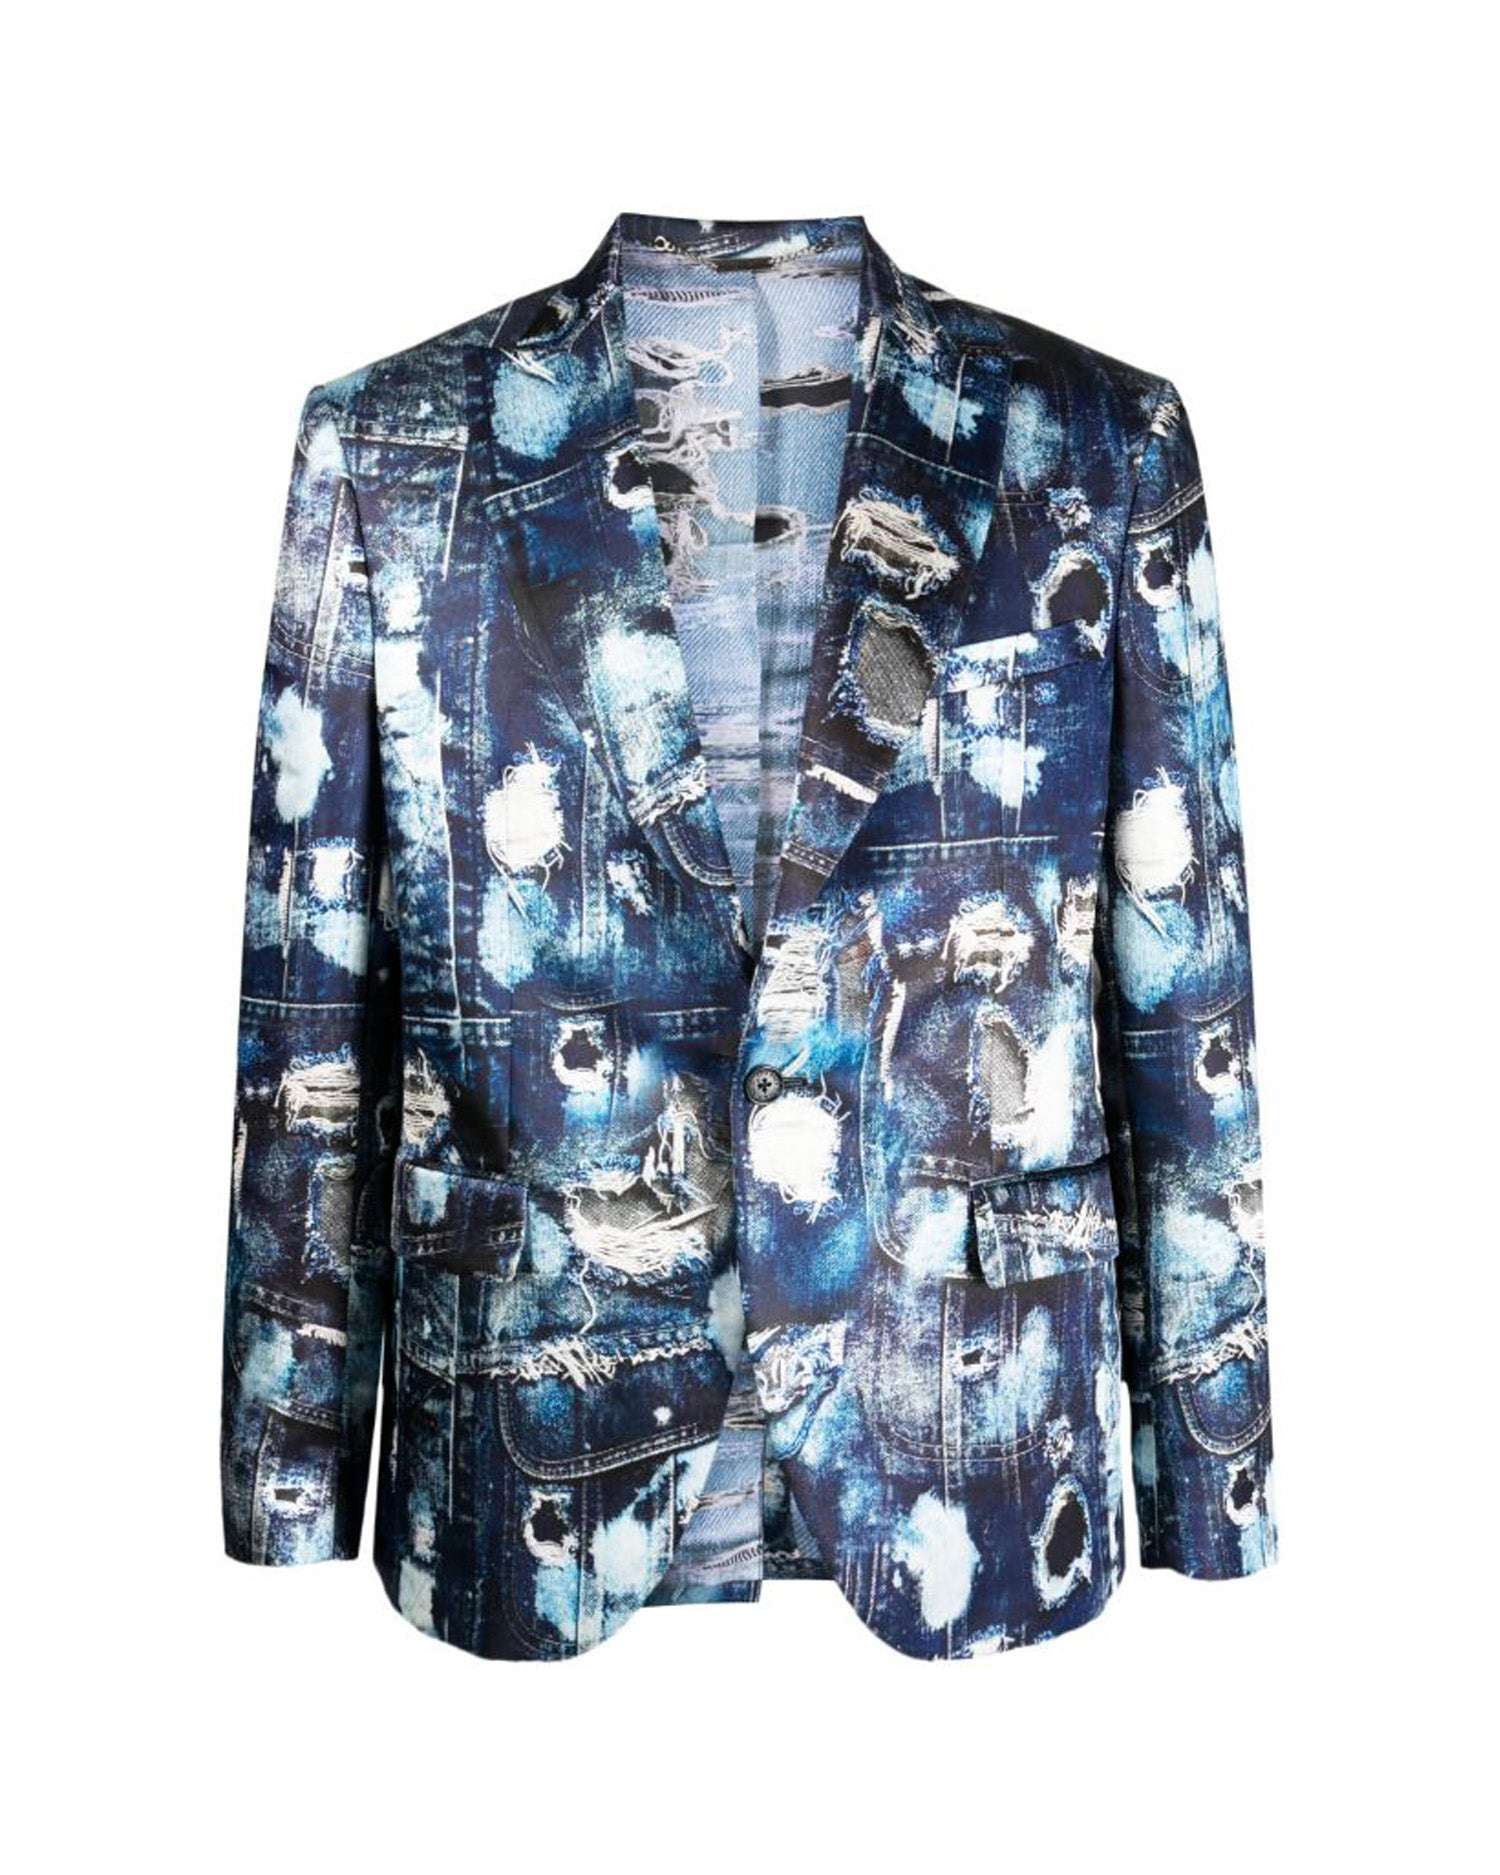 John Richmond Jacket With Lapel And Iconic Denim Pattern Fashion Show. In Fantasia